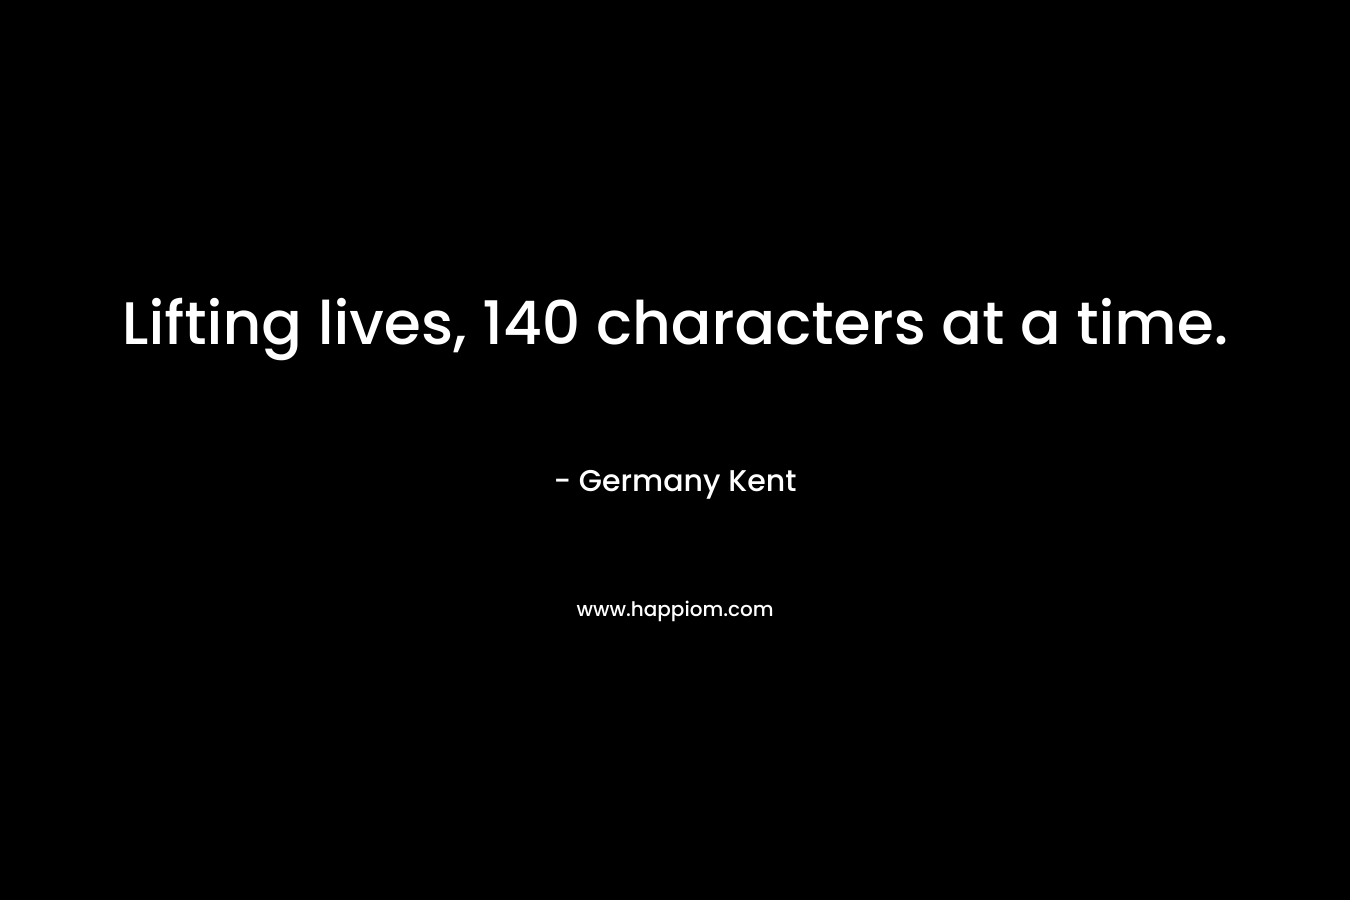 Lifting lives, 140 characters at a time. – Germany Kent